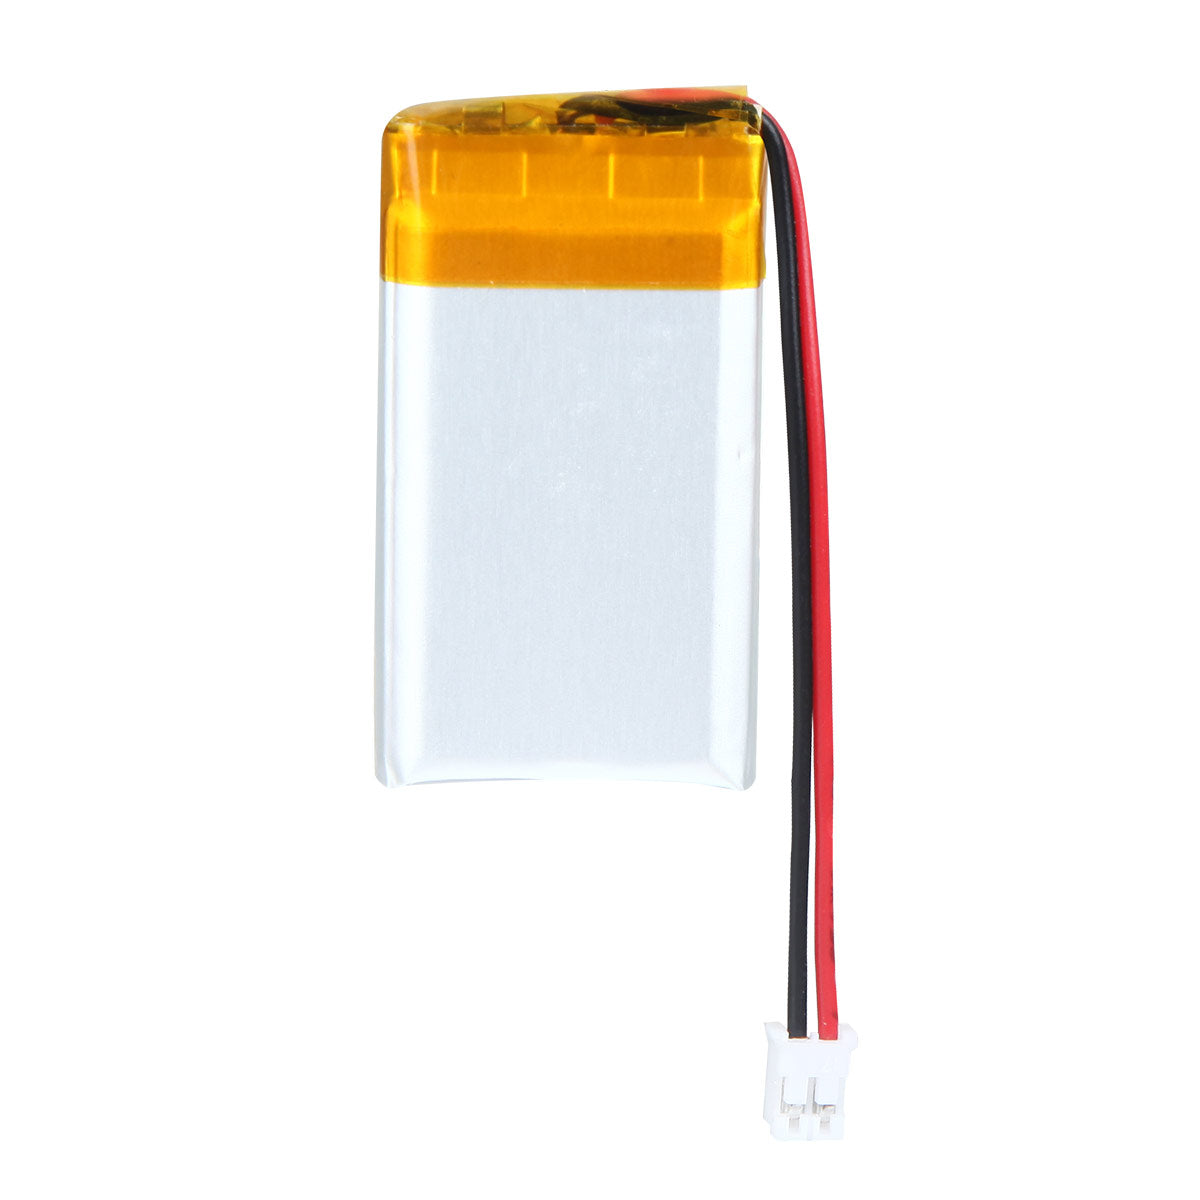 YDL 3.7V 300mAh 502035 Rechargeable Lithium  Polymer Battery